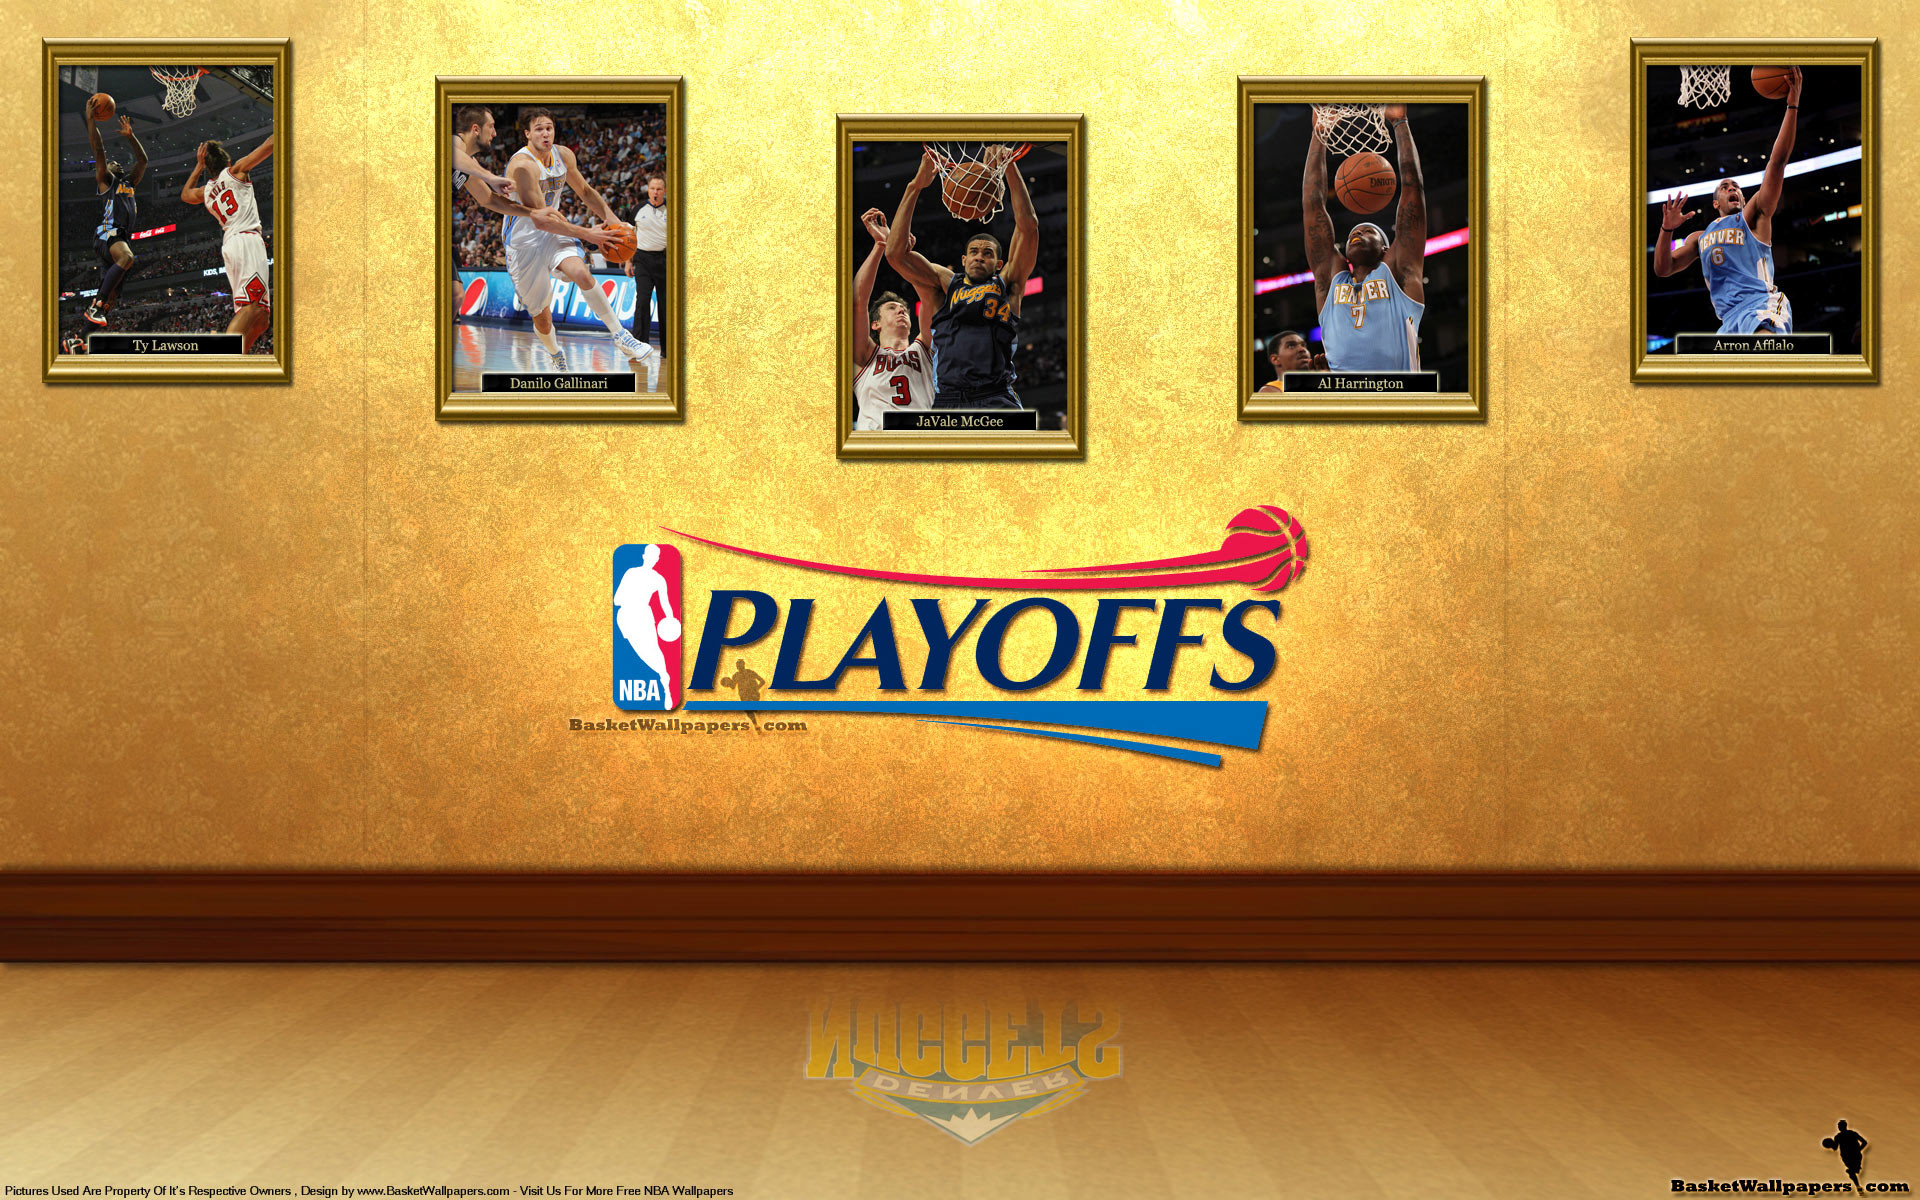 1920x1200 Denver Nuggets See You In Playoffs 2012 Wallpaper